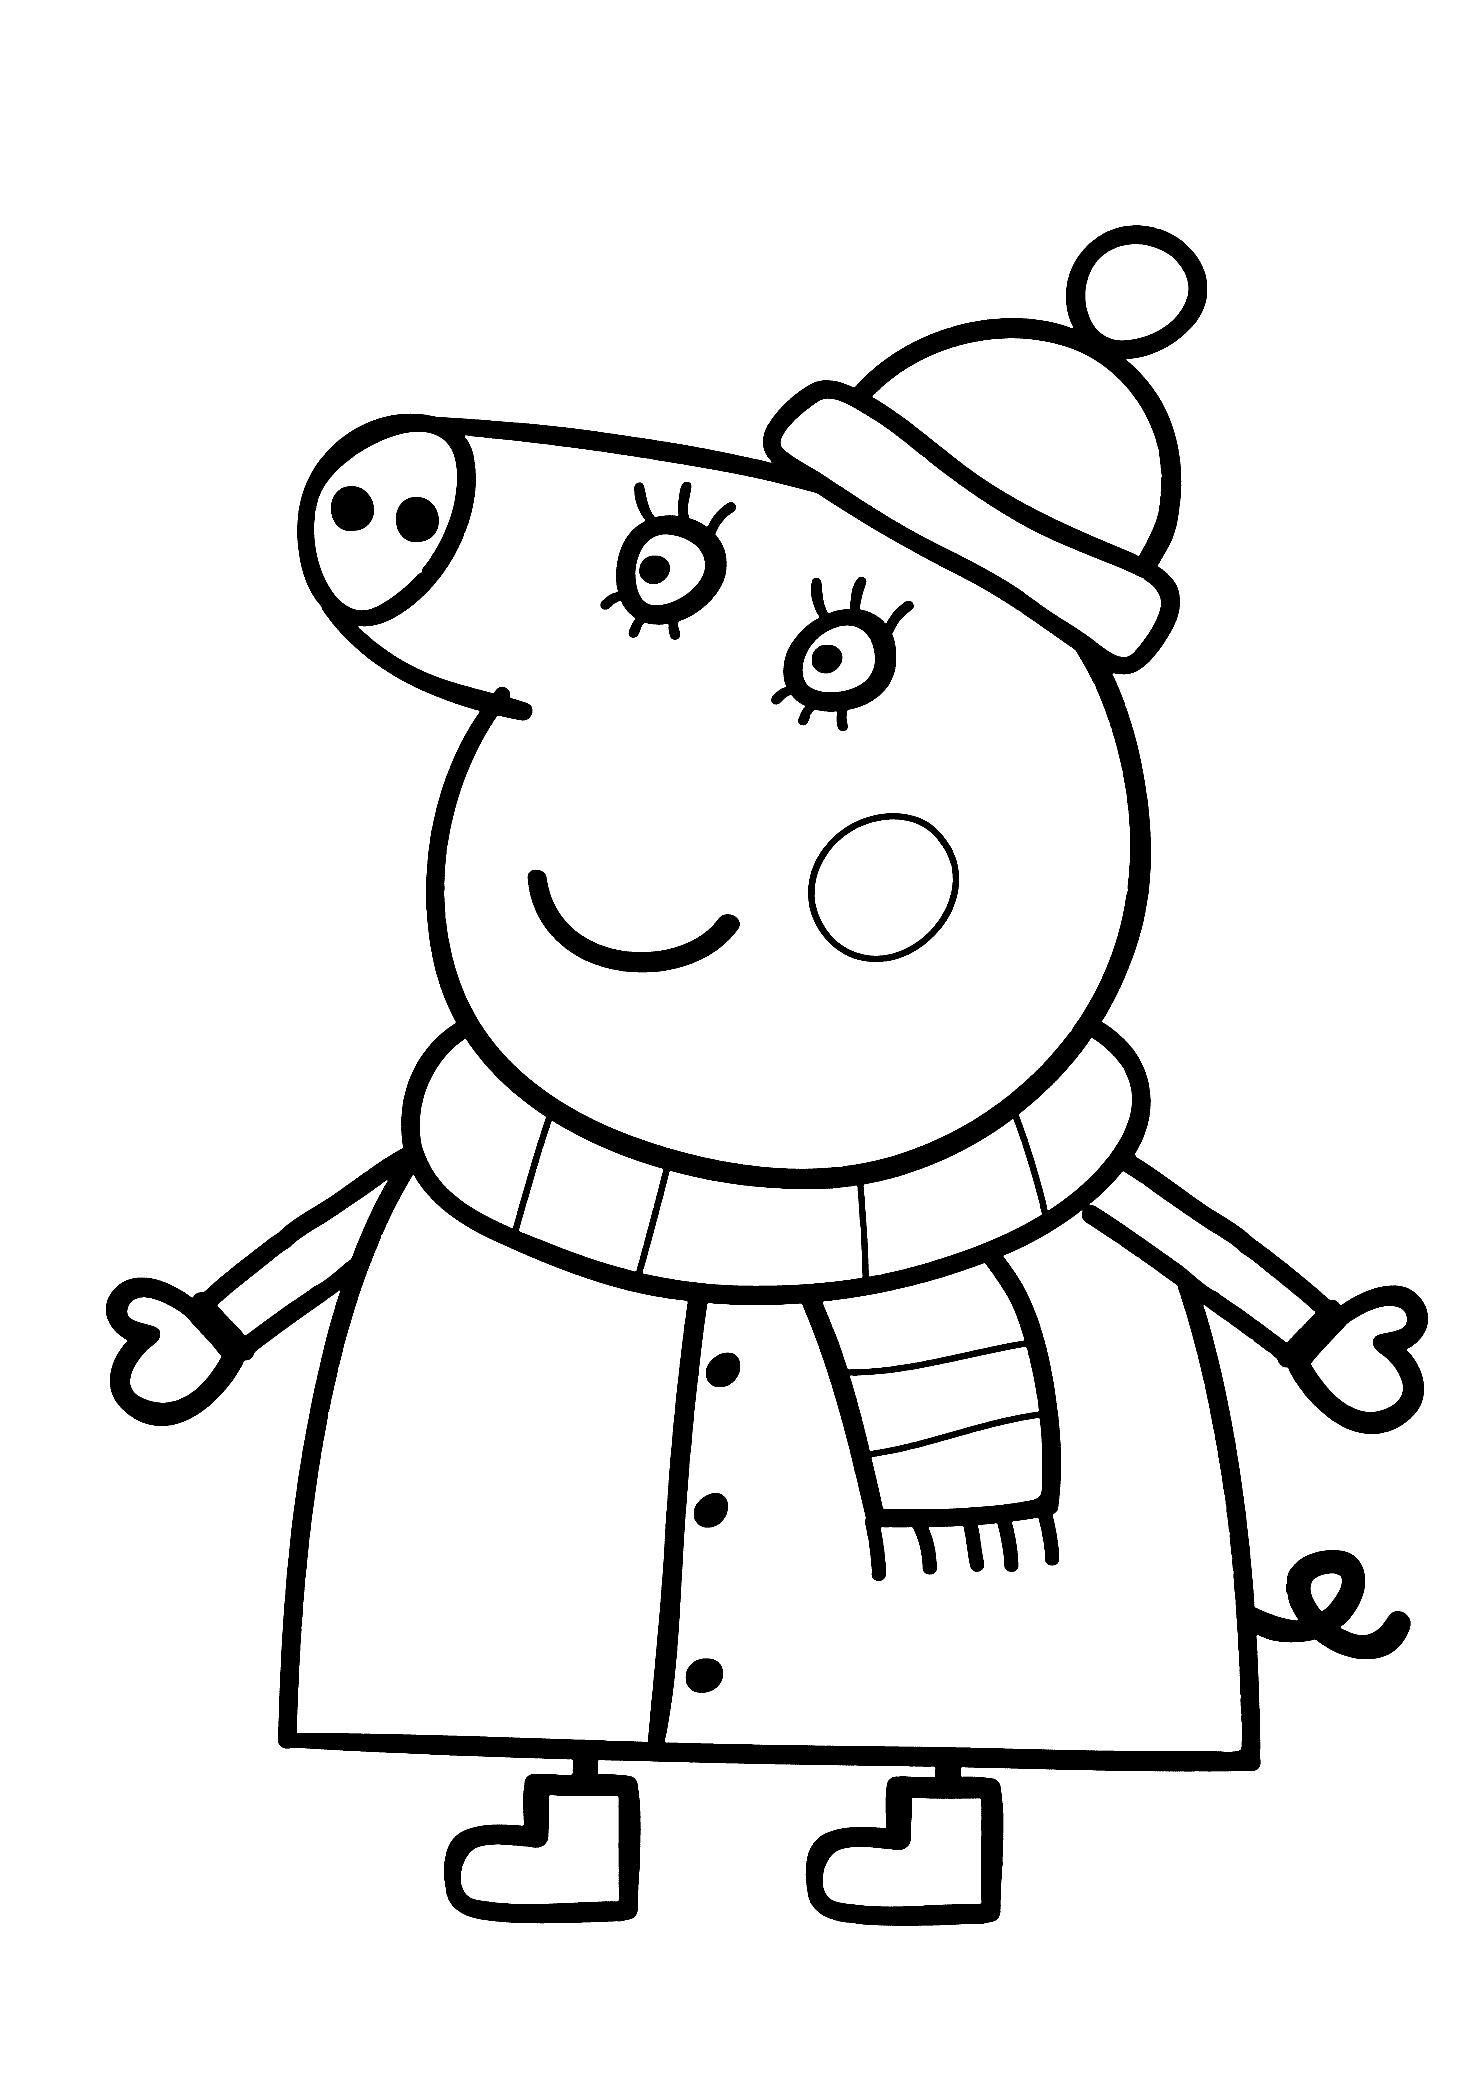 Peppa Pig with family - Coloring Pages for kids